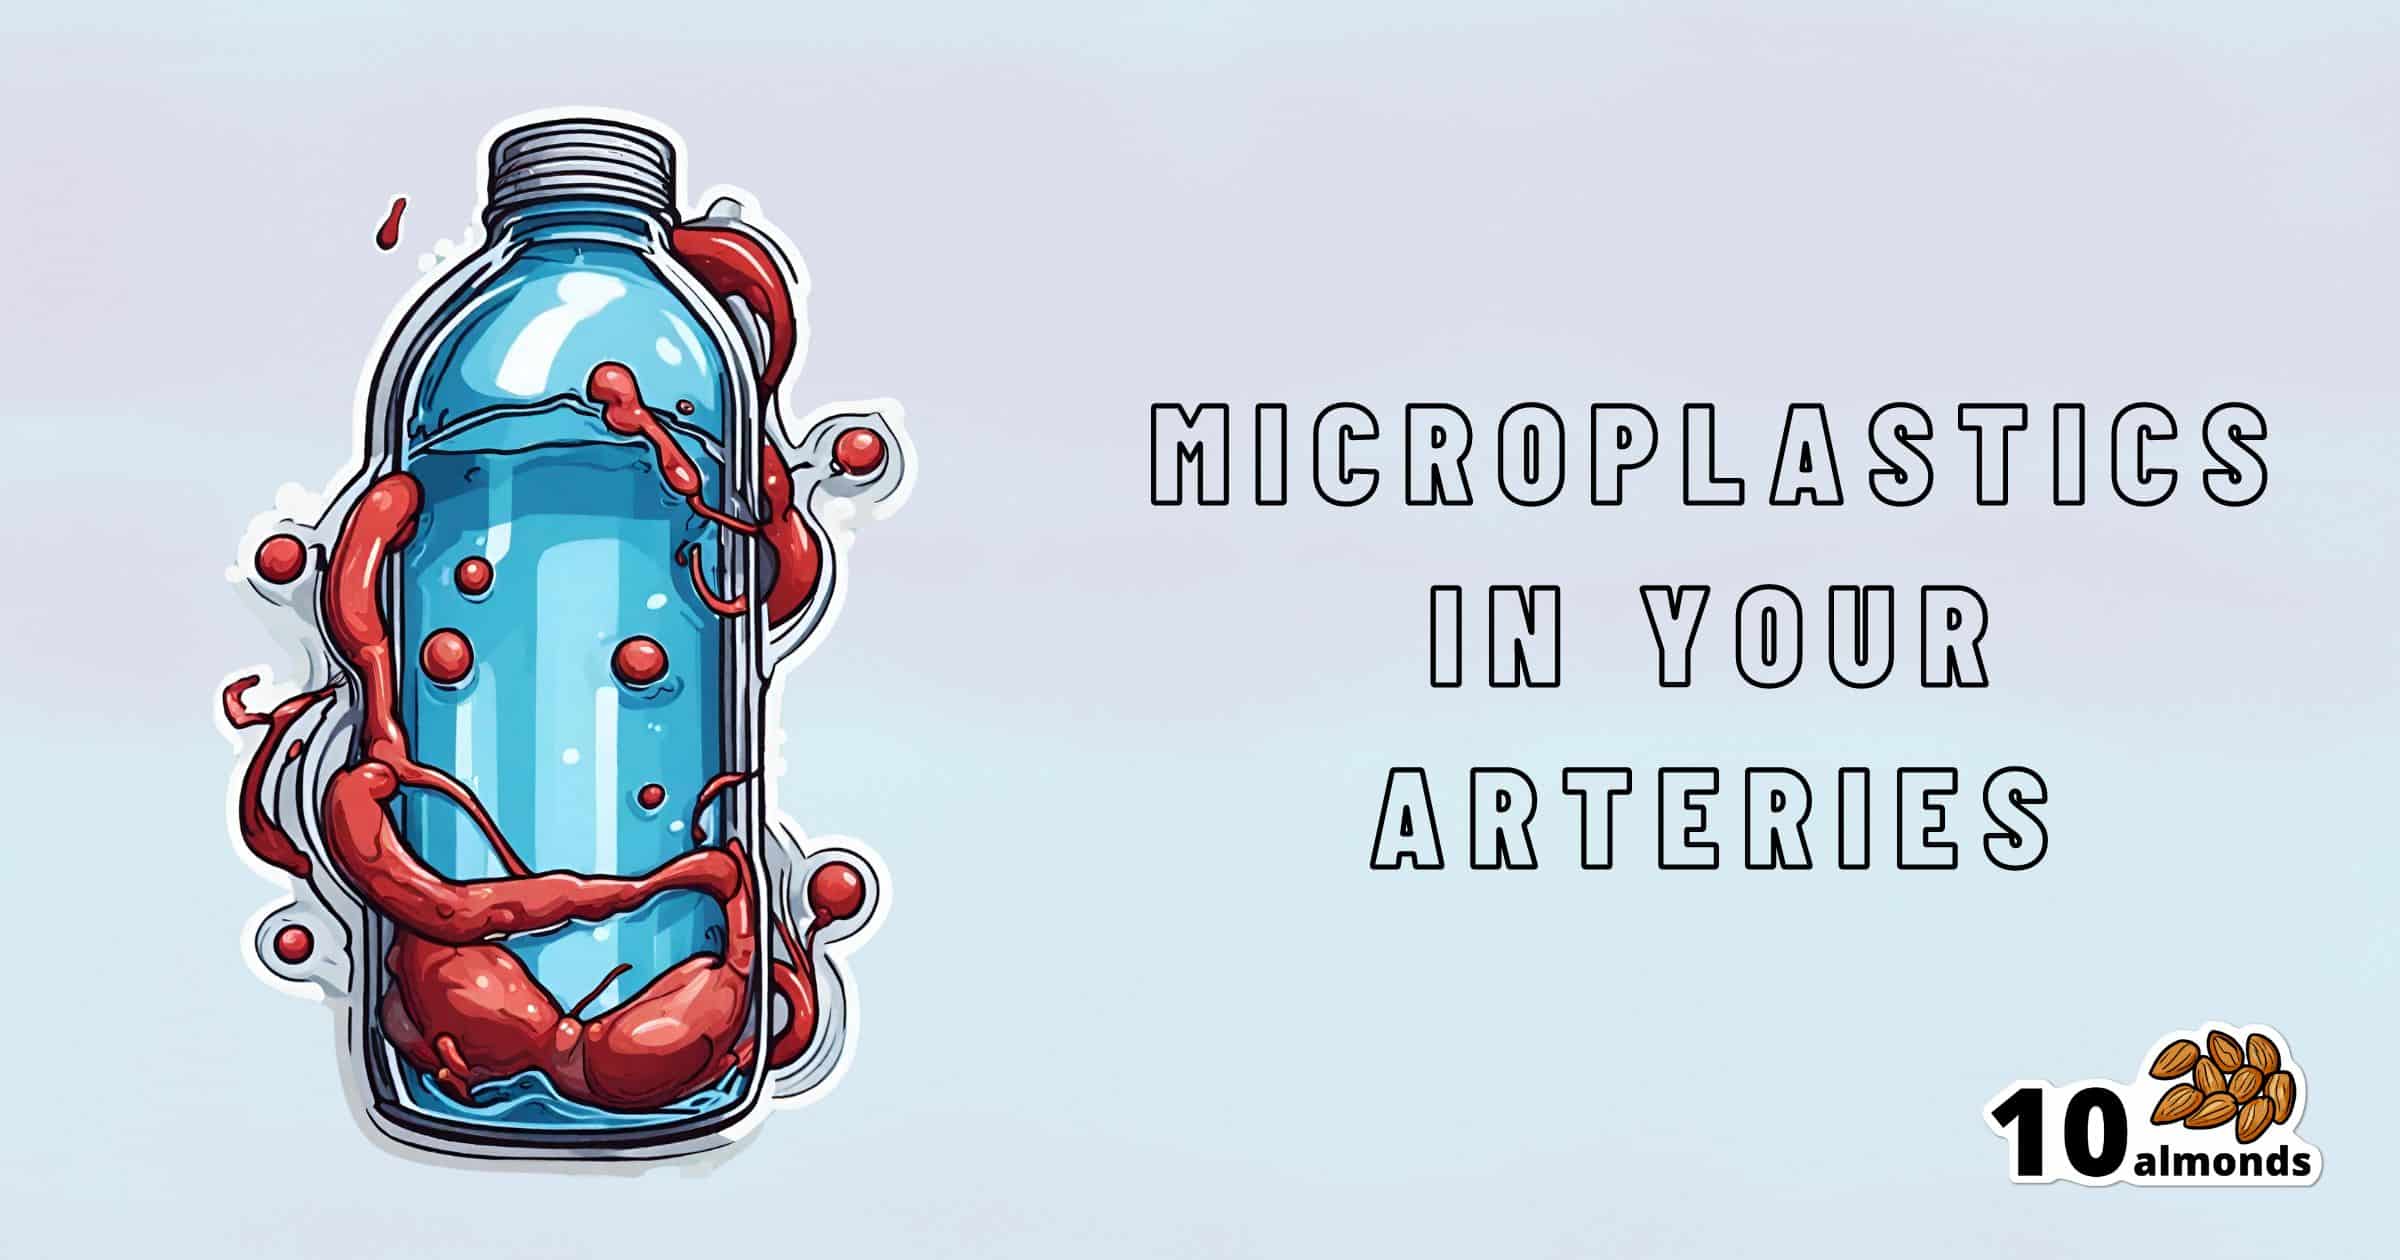 A plastic bottle filled with red liquid and a representation of an artery, highlighting the issue of microplastics in the bloodstream and their link to stroke, with the text "microplastics in your arteries